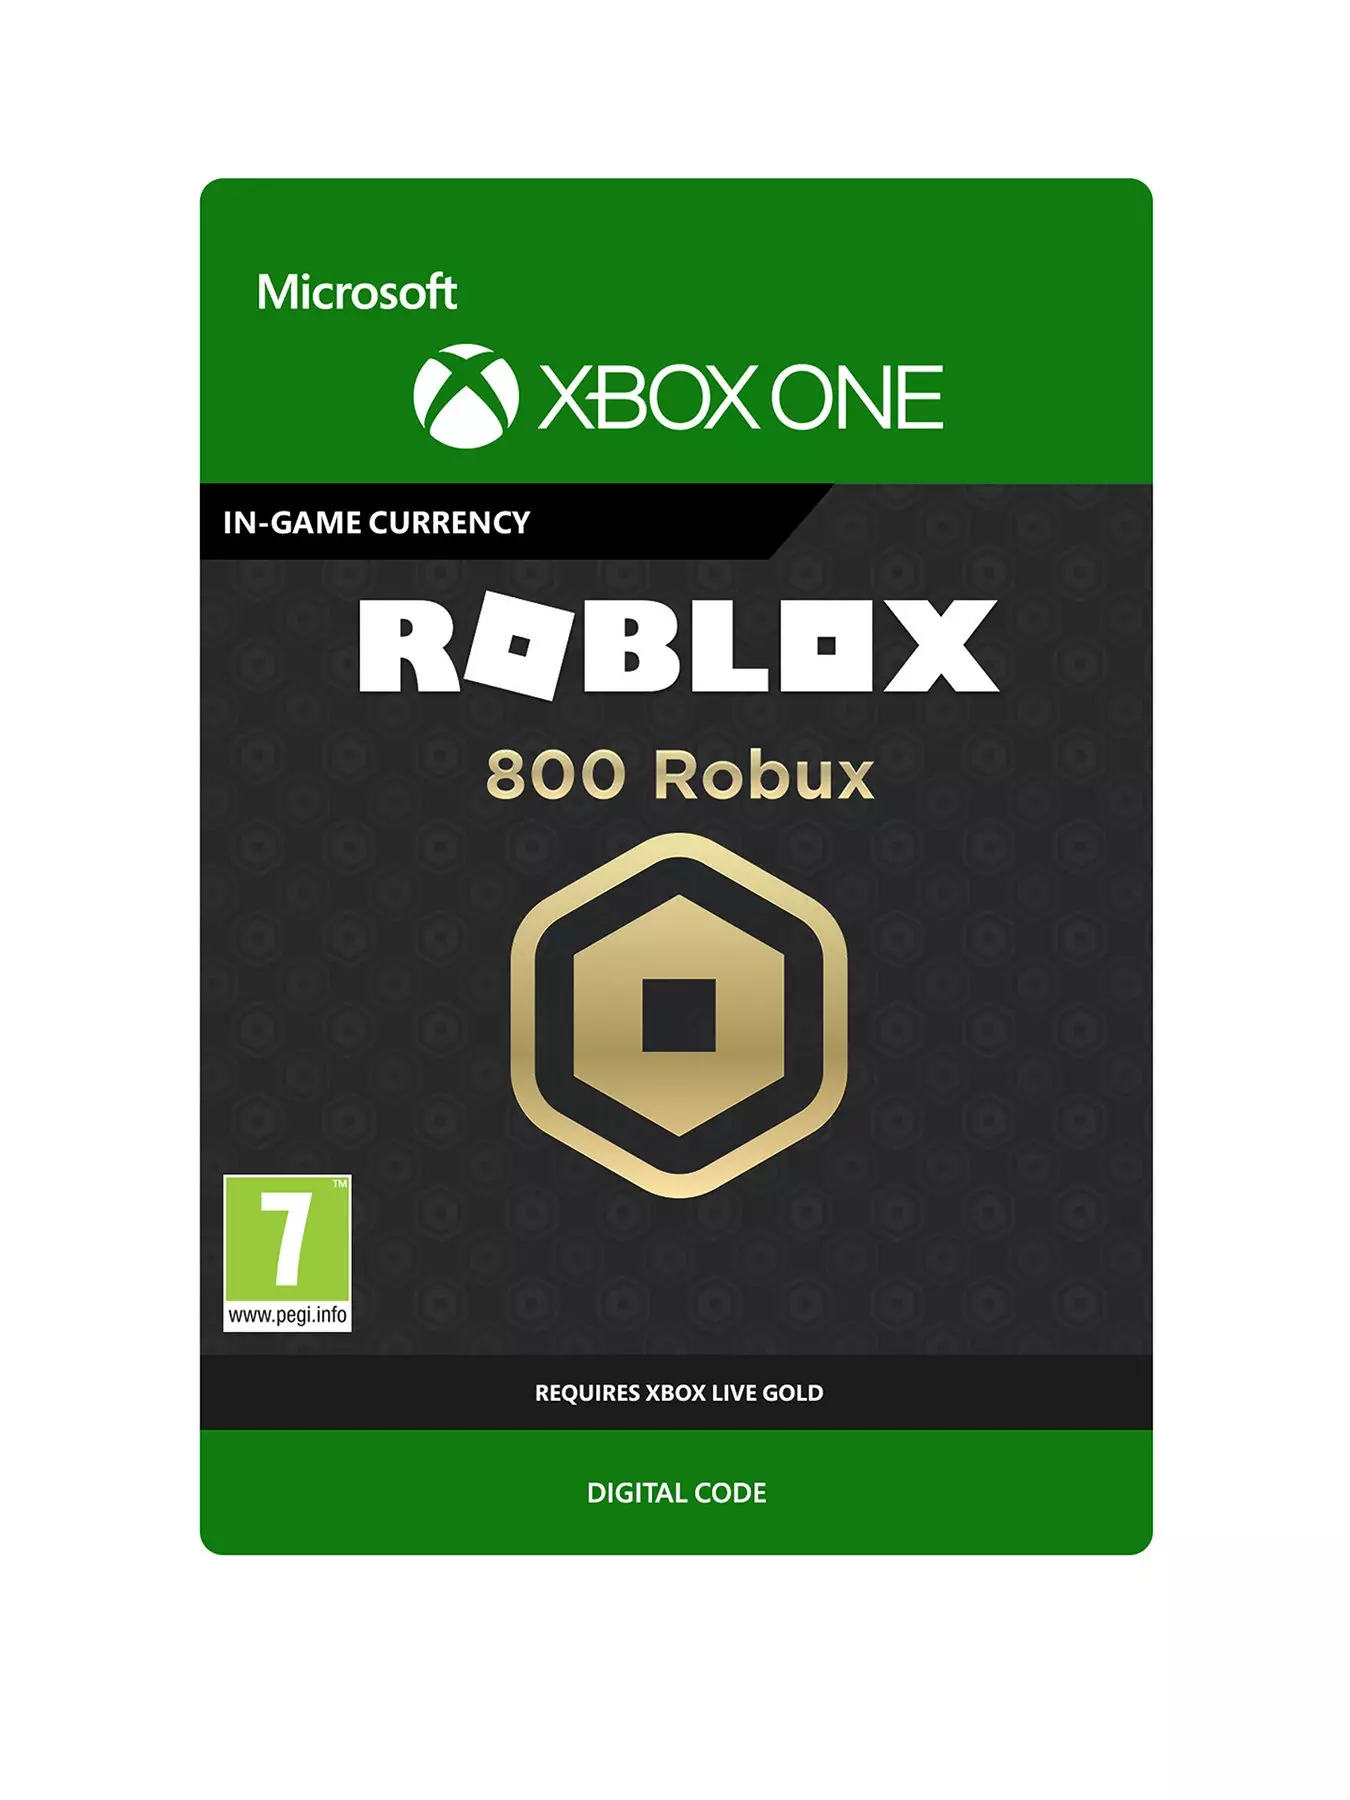 roblox release date news updates for xbox one xbox one headquarters